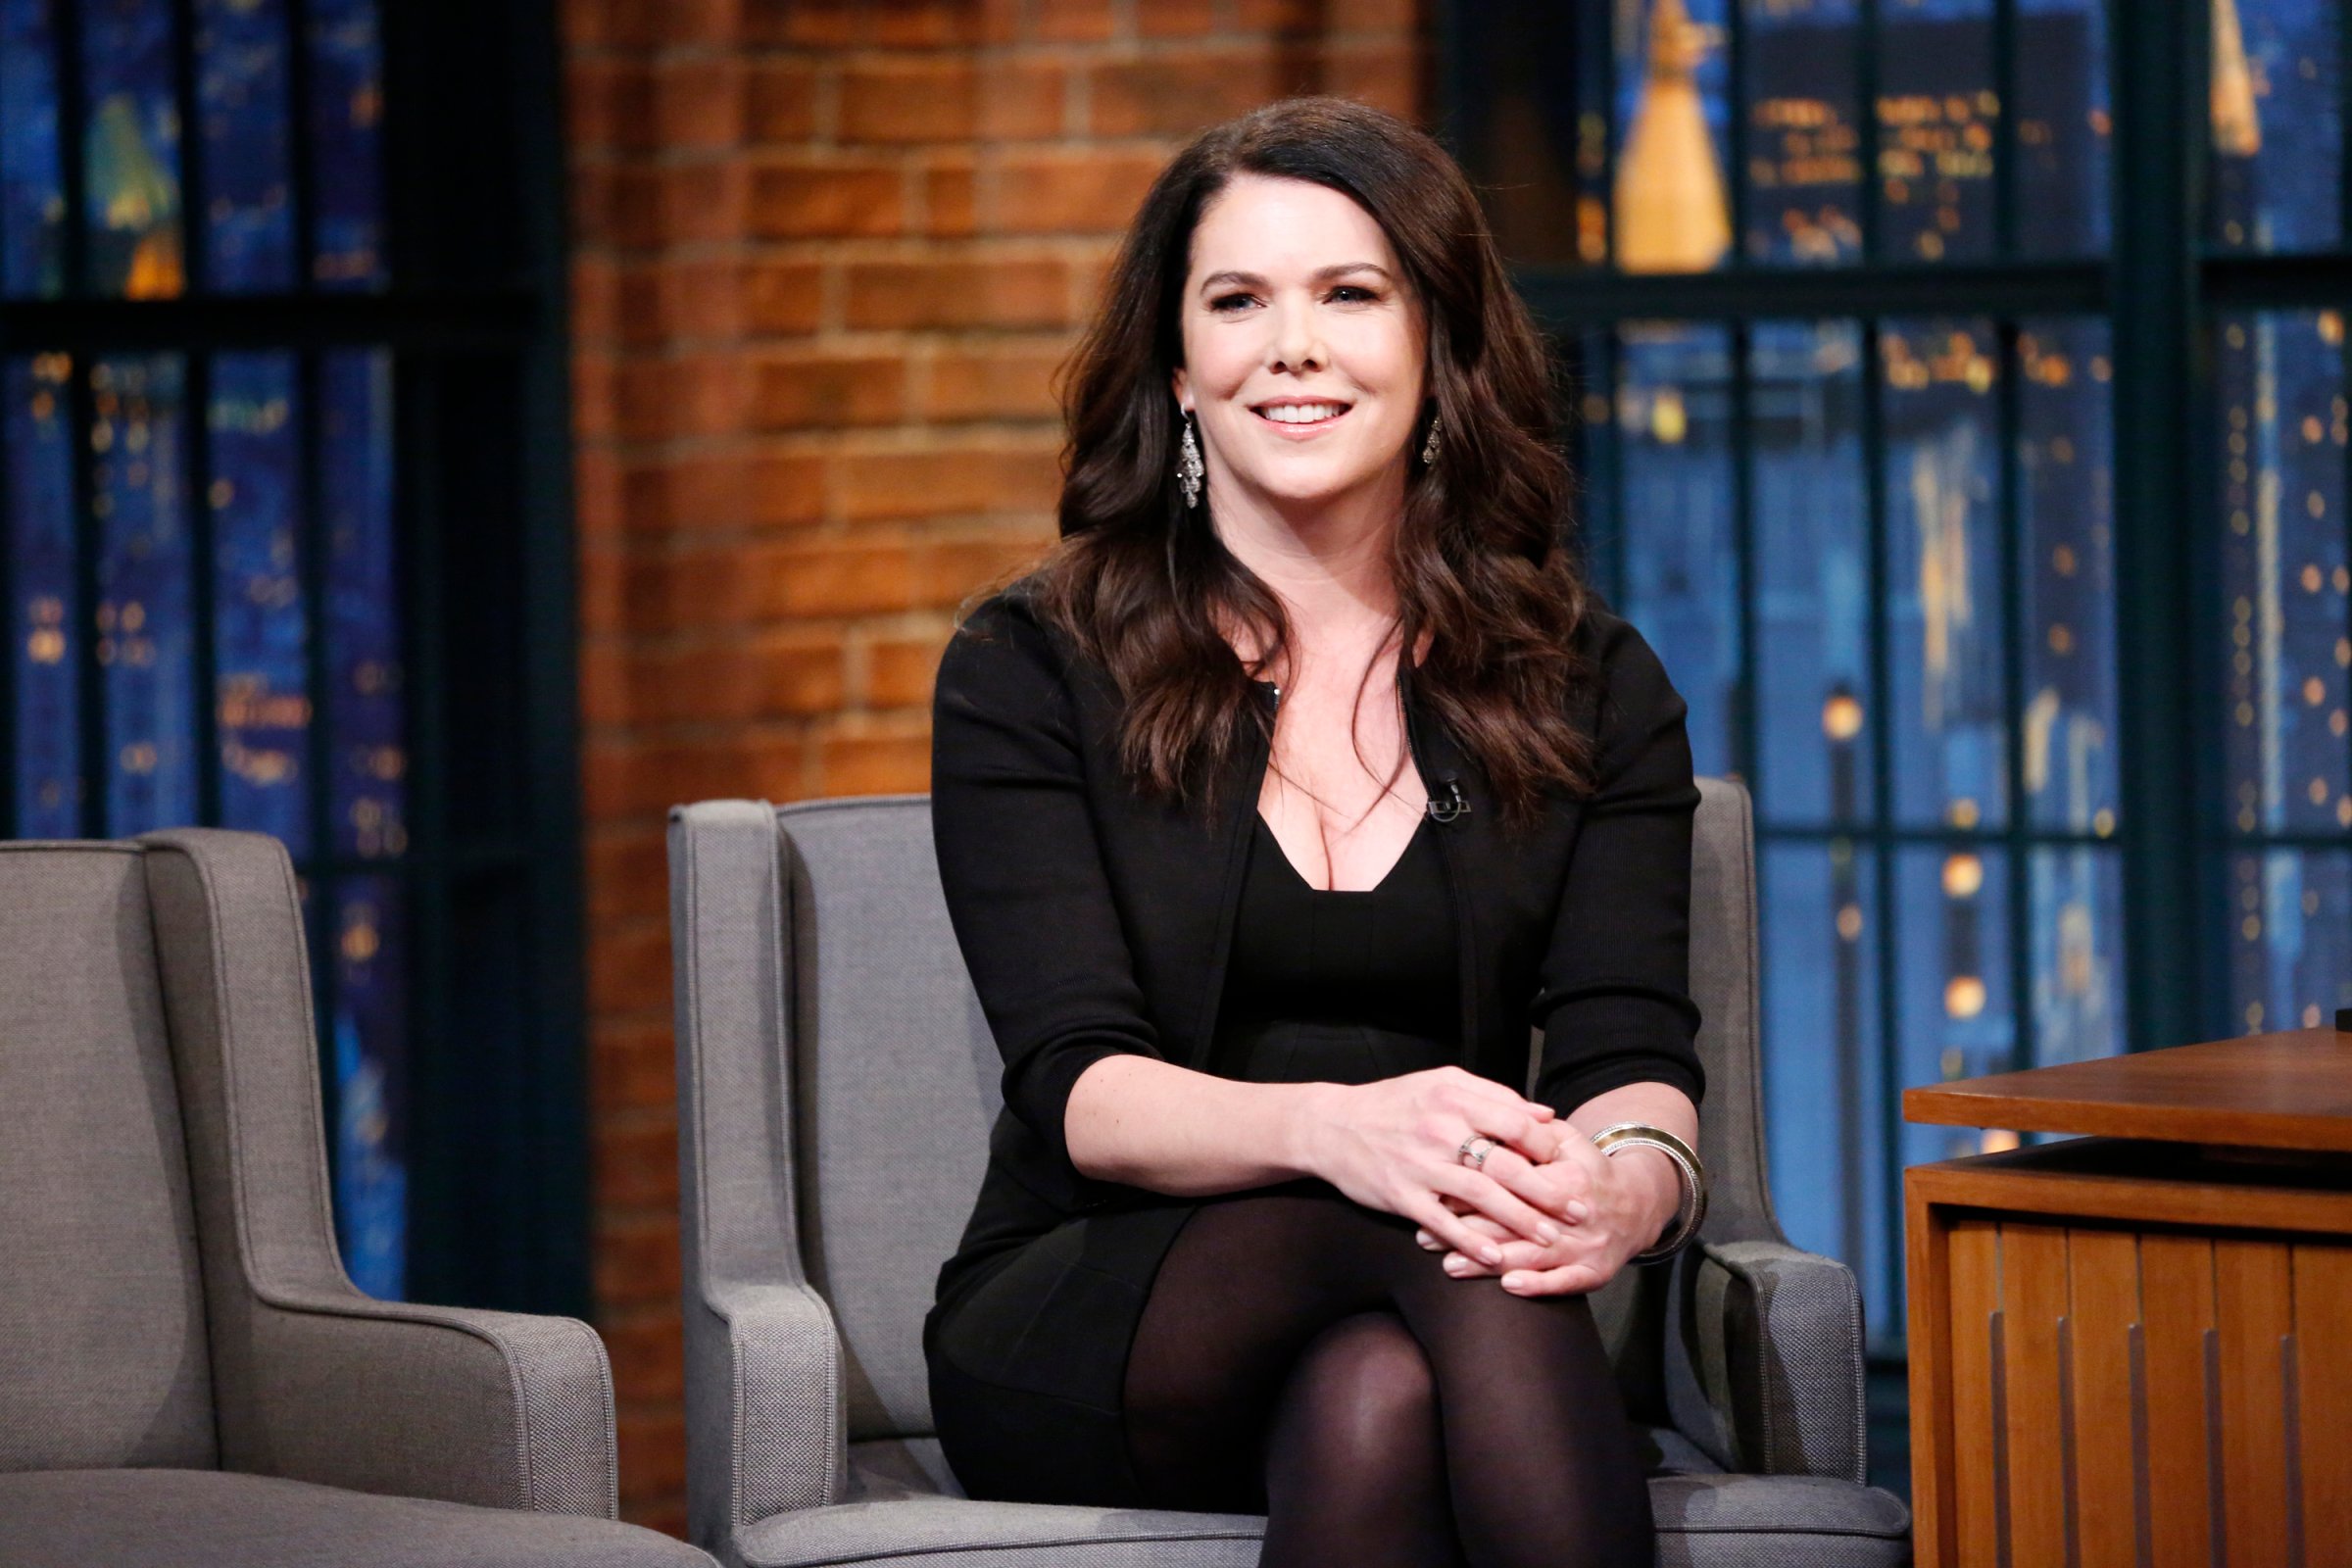 LATE NIGHT WITH SETH MEYERS -- Episode 0153 -- Pictured: Actress Lauren Graham during an interview on January 20, 2015 -- (Photo by: Lloyd Bishop/NBC/NBCU Photo Bank)